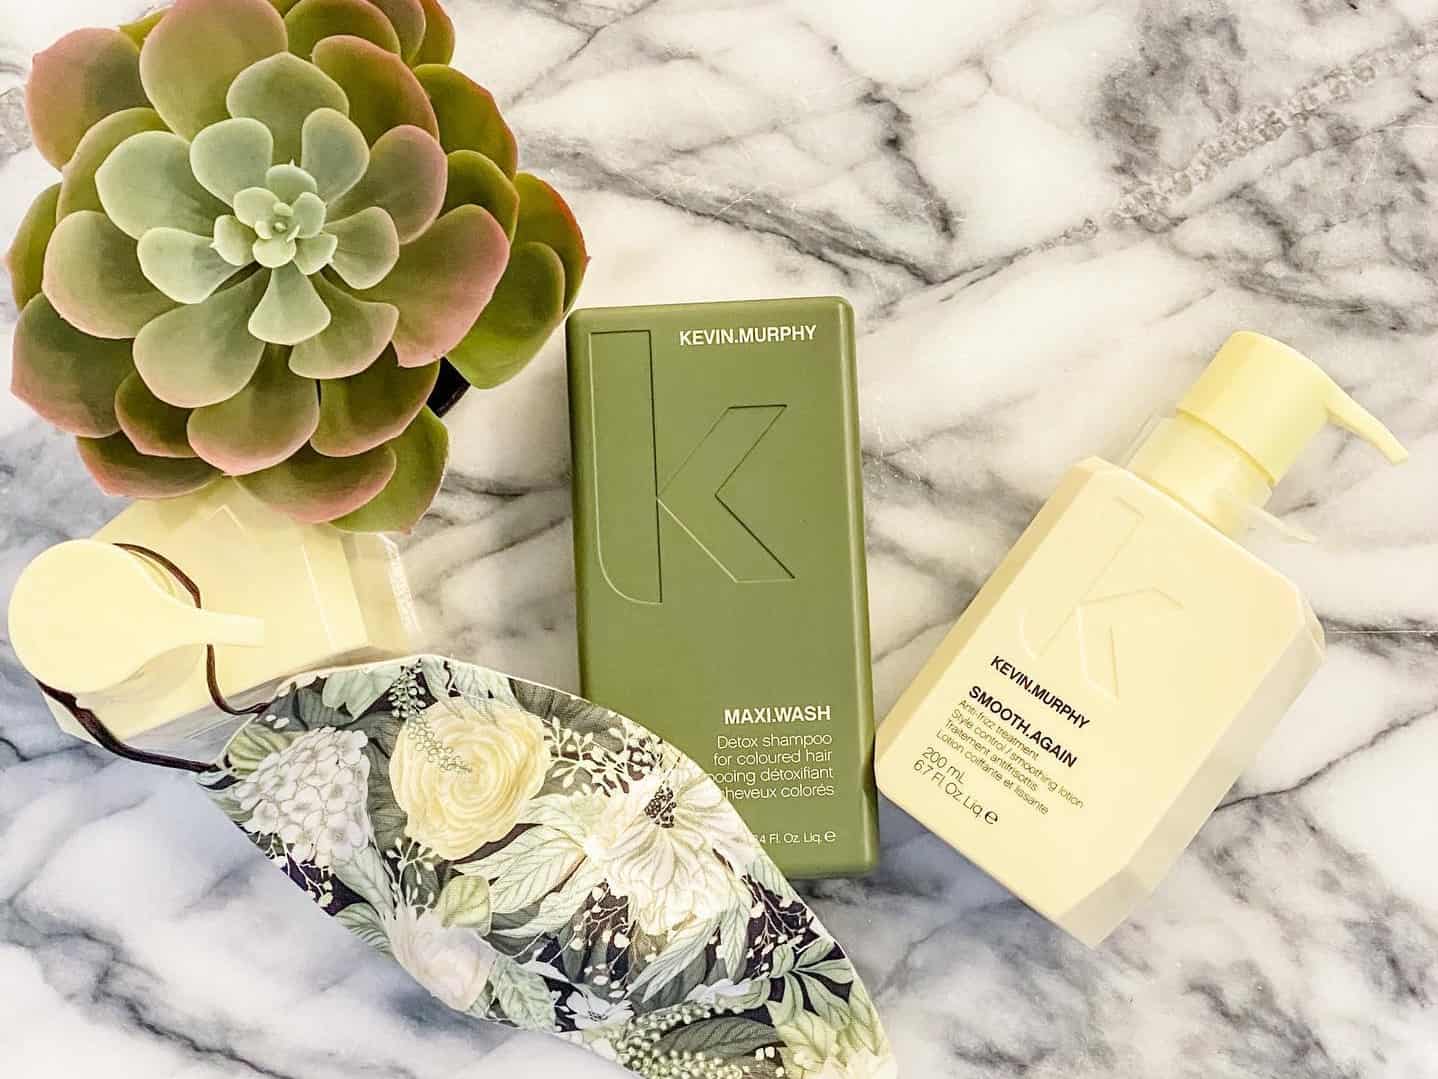 Kevin Murphy Smooth Again and Maxi Wash products rich in antioxidants and green tea tree leaf